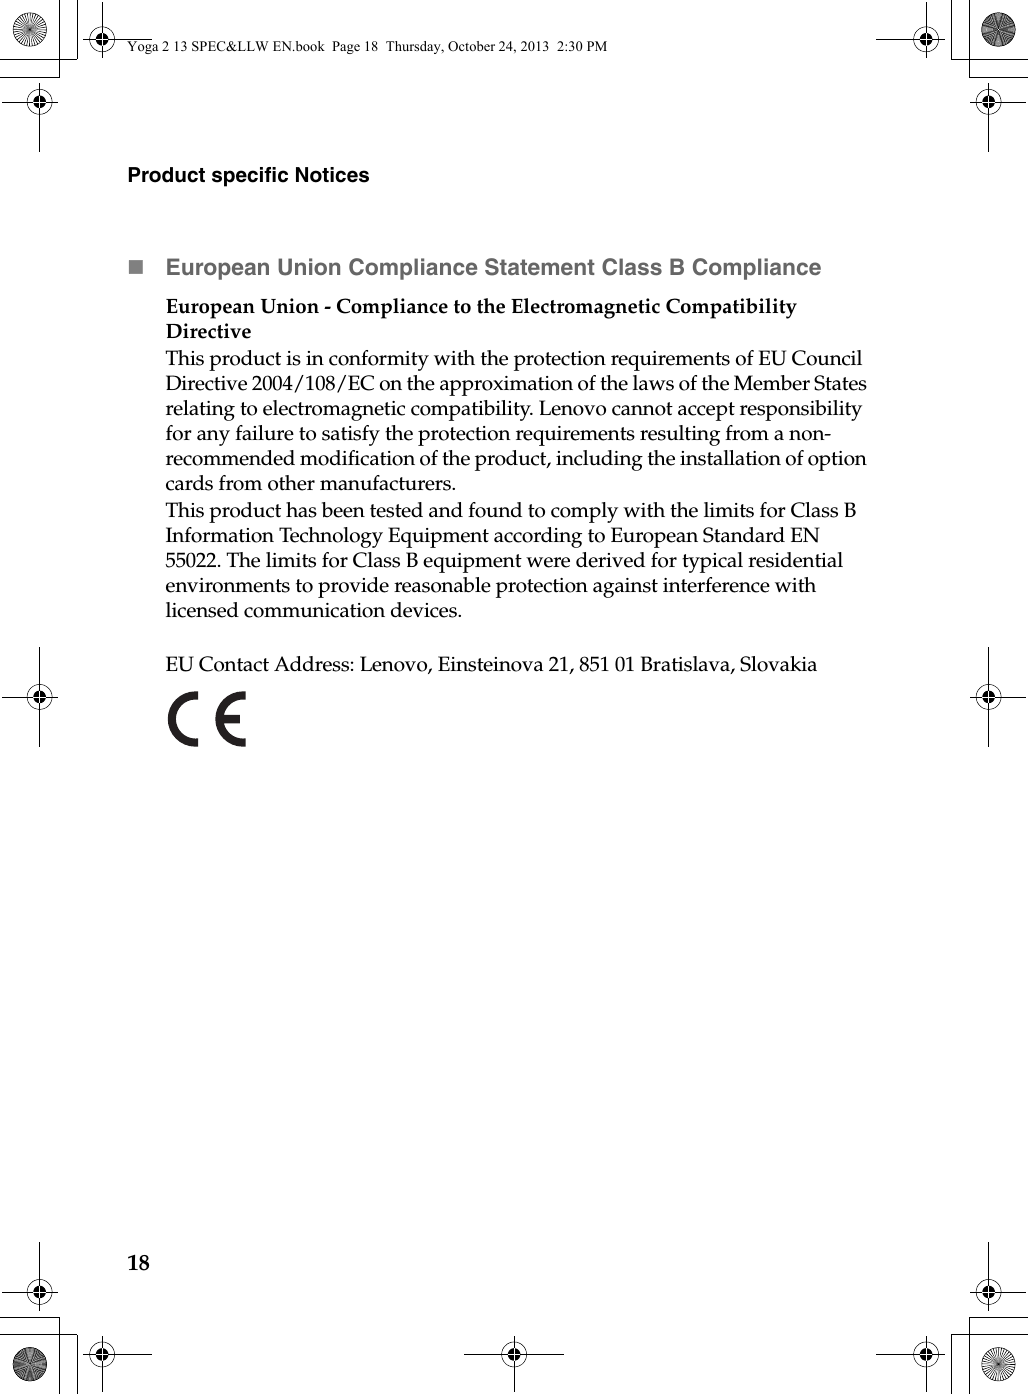 18Product specific NoticesEuropean Union Compliance Statement Class B ComplianceEuropean Union - Compliance to the Electromagnetic Compatibility DirectiveThis product is in conformity with the protection requirements of EU Council Directive 2004/108/EC on the approximation of the laws of the Member States relating to electromagnetic compatibility. Lenovo cannot accept responsibility for any failure to satisfy the protection requirements resulting from a non-recommended modification of the product, including the installation of option cards from other manufacturers.This product has been tested and found to comply with the limits for Class B Information Technology Equipment according to European Standard EN 55022. The limits for Class B equipment were derived for typical residential environments to provide reasonable protection against interference with licensed communication devices.EU Contact Address: Lenovo, Einsteinova 21, 851 01 Bratislava, SlovakiaYoga 2 13 SPEC&amp;LLW EN.book  Page 18  Thursday, October 24, 2013  2:30 PM